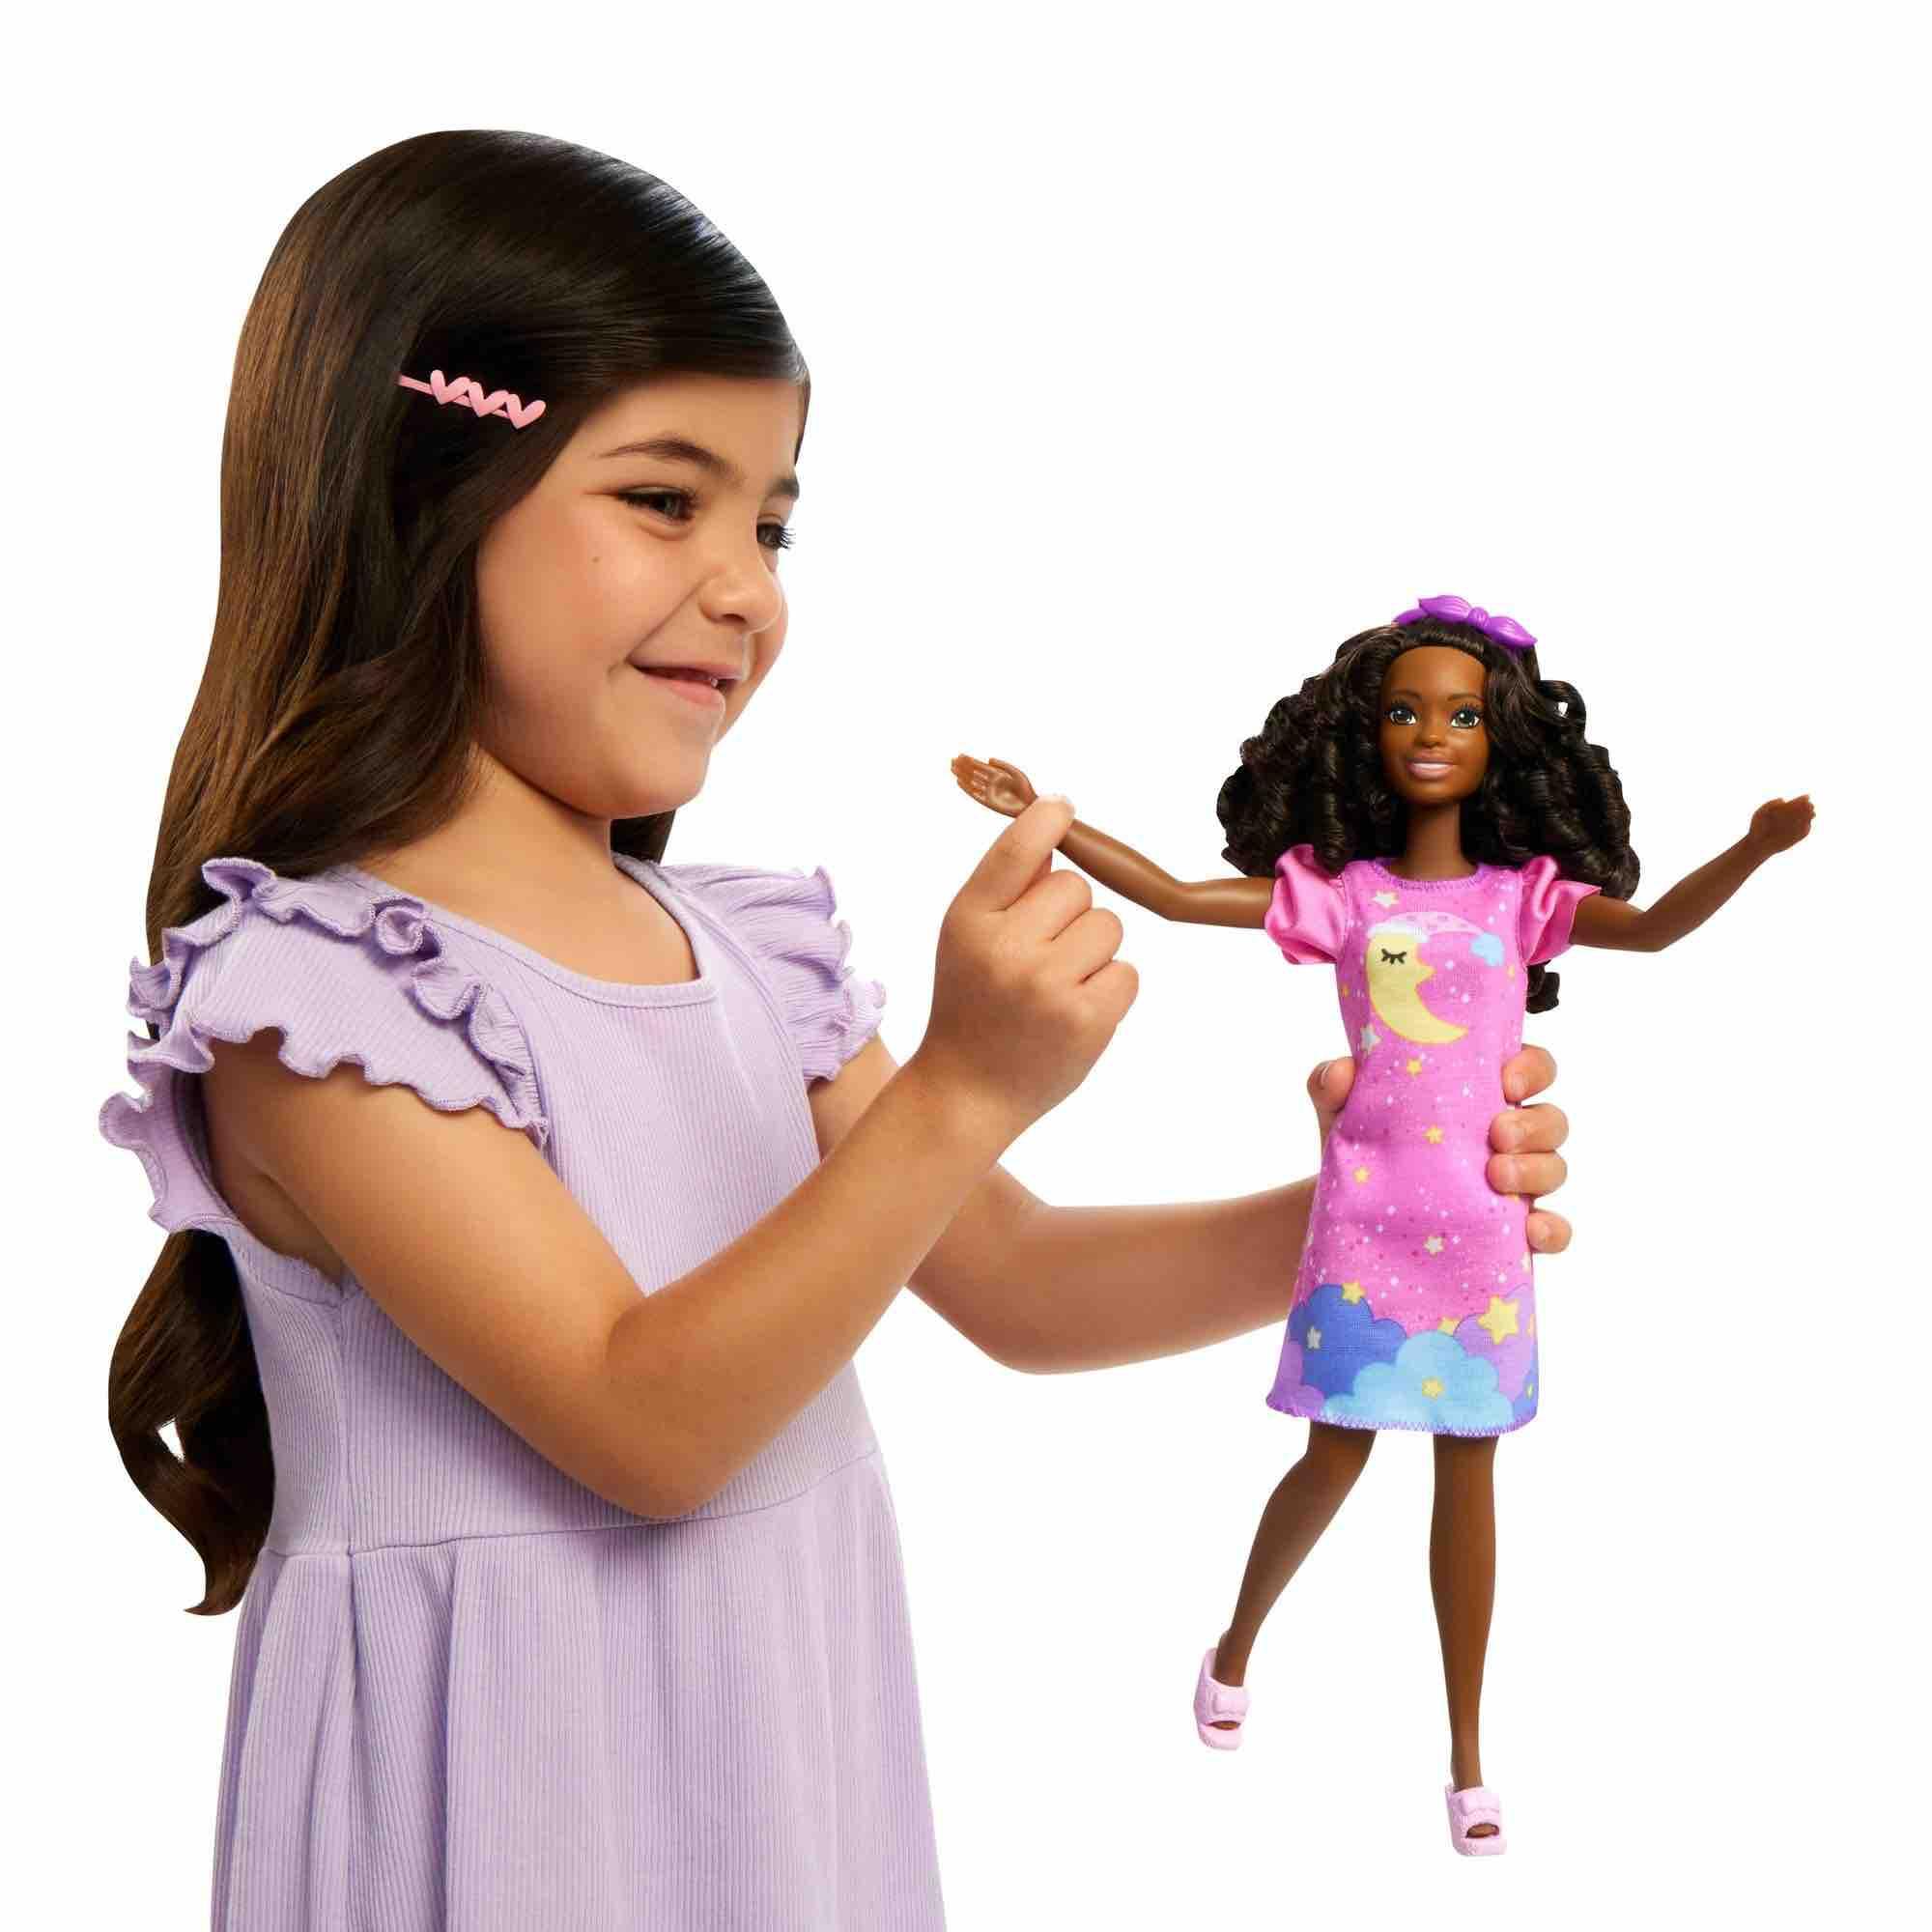 Mattel Introduces My First Barbie: The Perfect Doll for Preschool-Aged Children - 4aKid